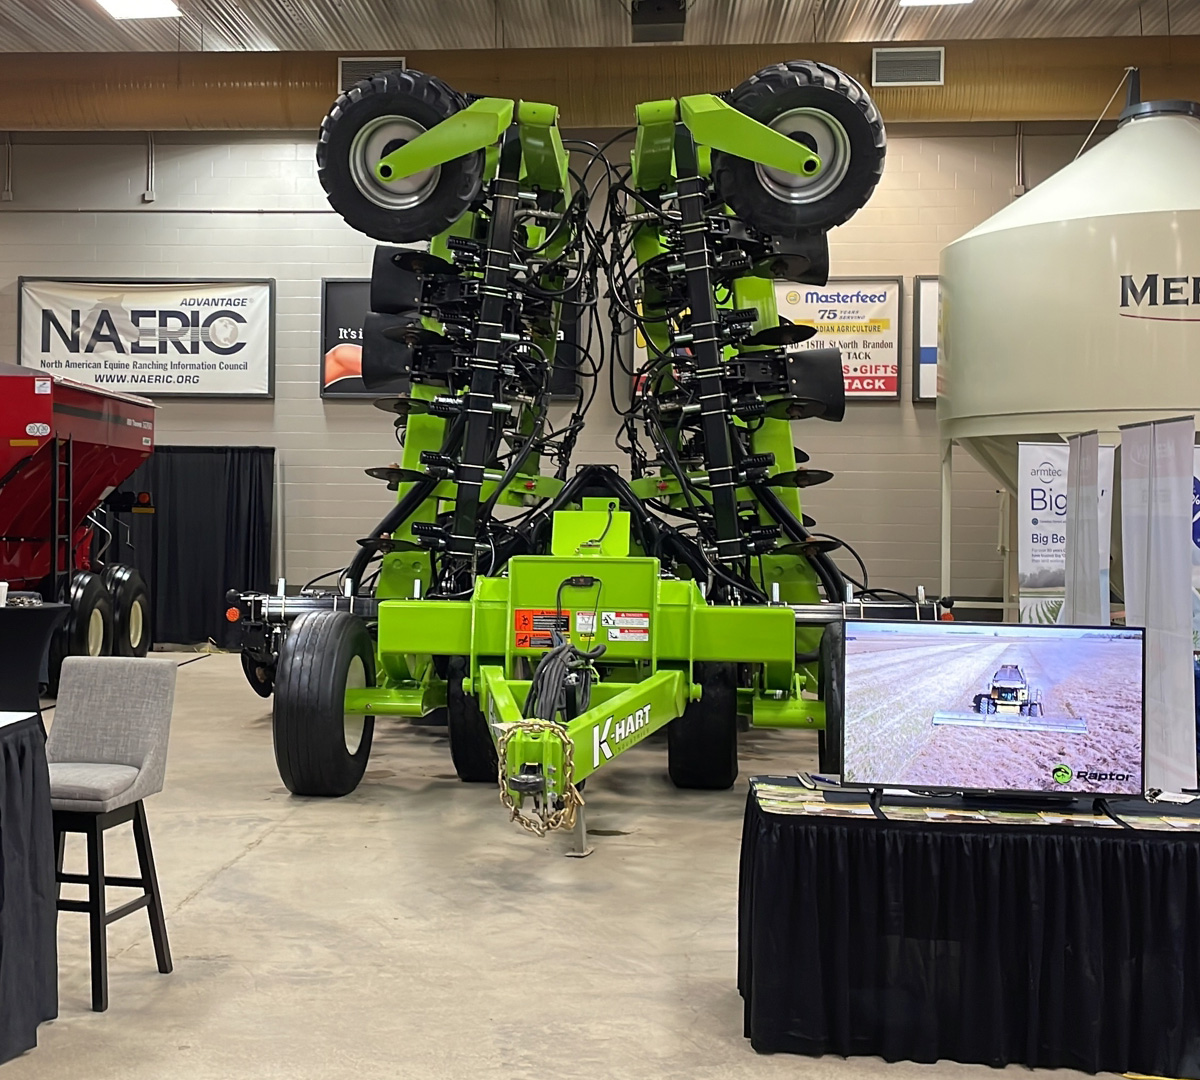 First Place!

We were awarded First Place in the Agriculture Equipment category of the @MBAgDays Innovation Showcase for our revolutionary Spyder Drill!

We’re here at the show in booth 1907. Come see the Spyder!

#NoTillFarming #agriculture #farming